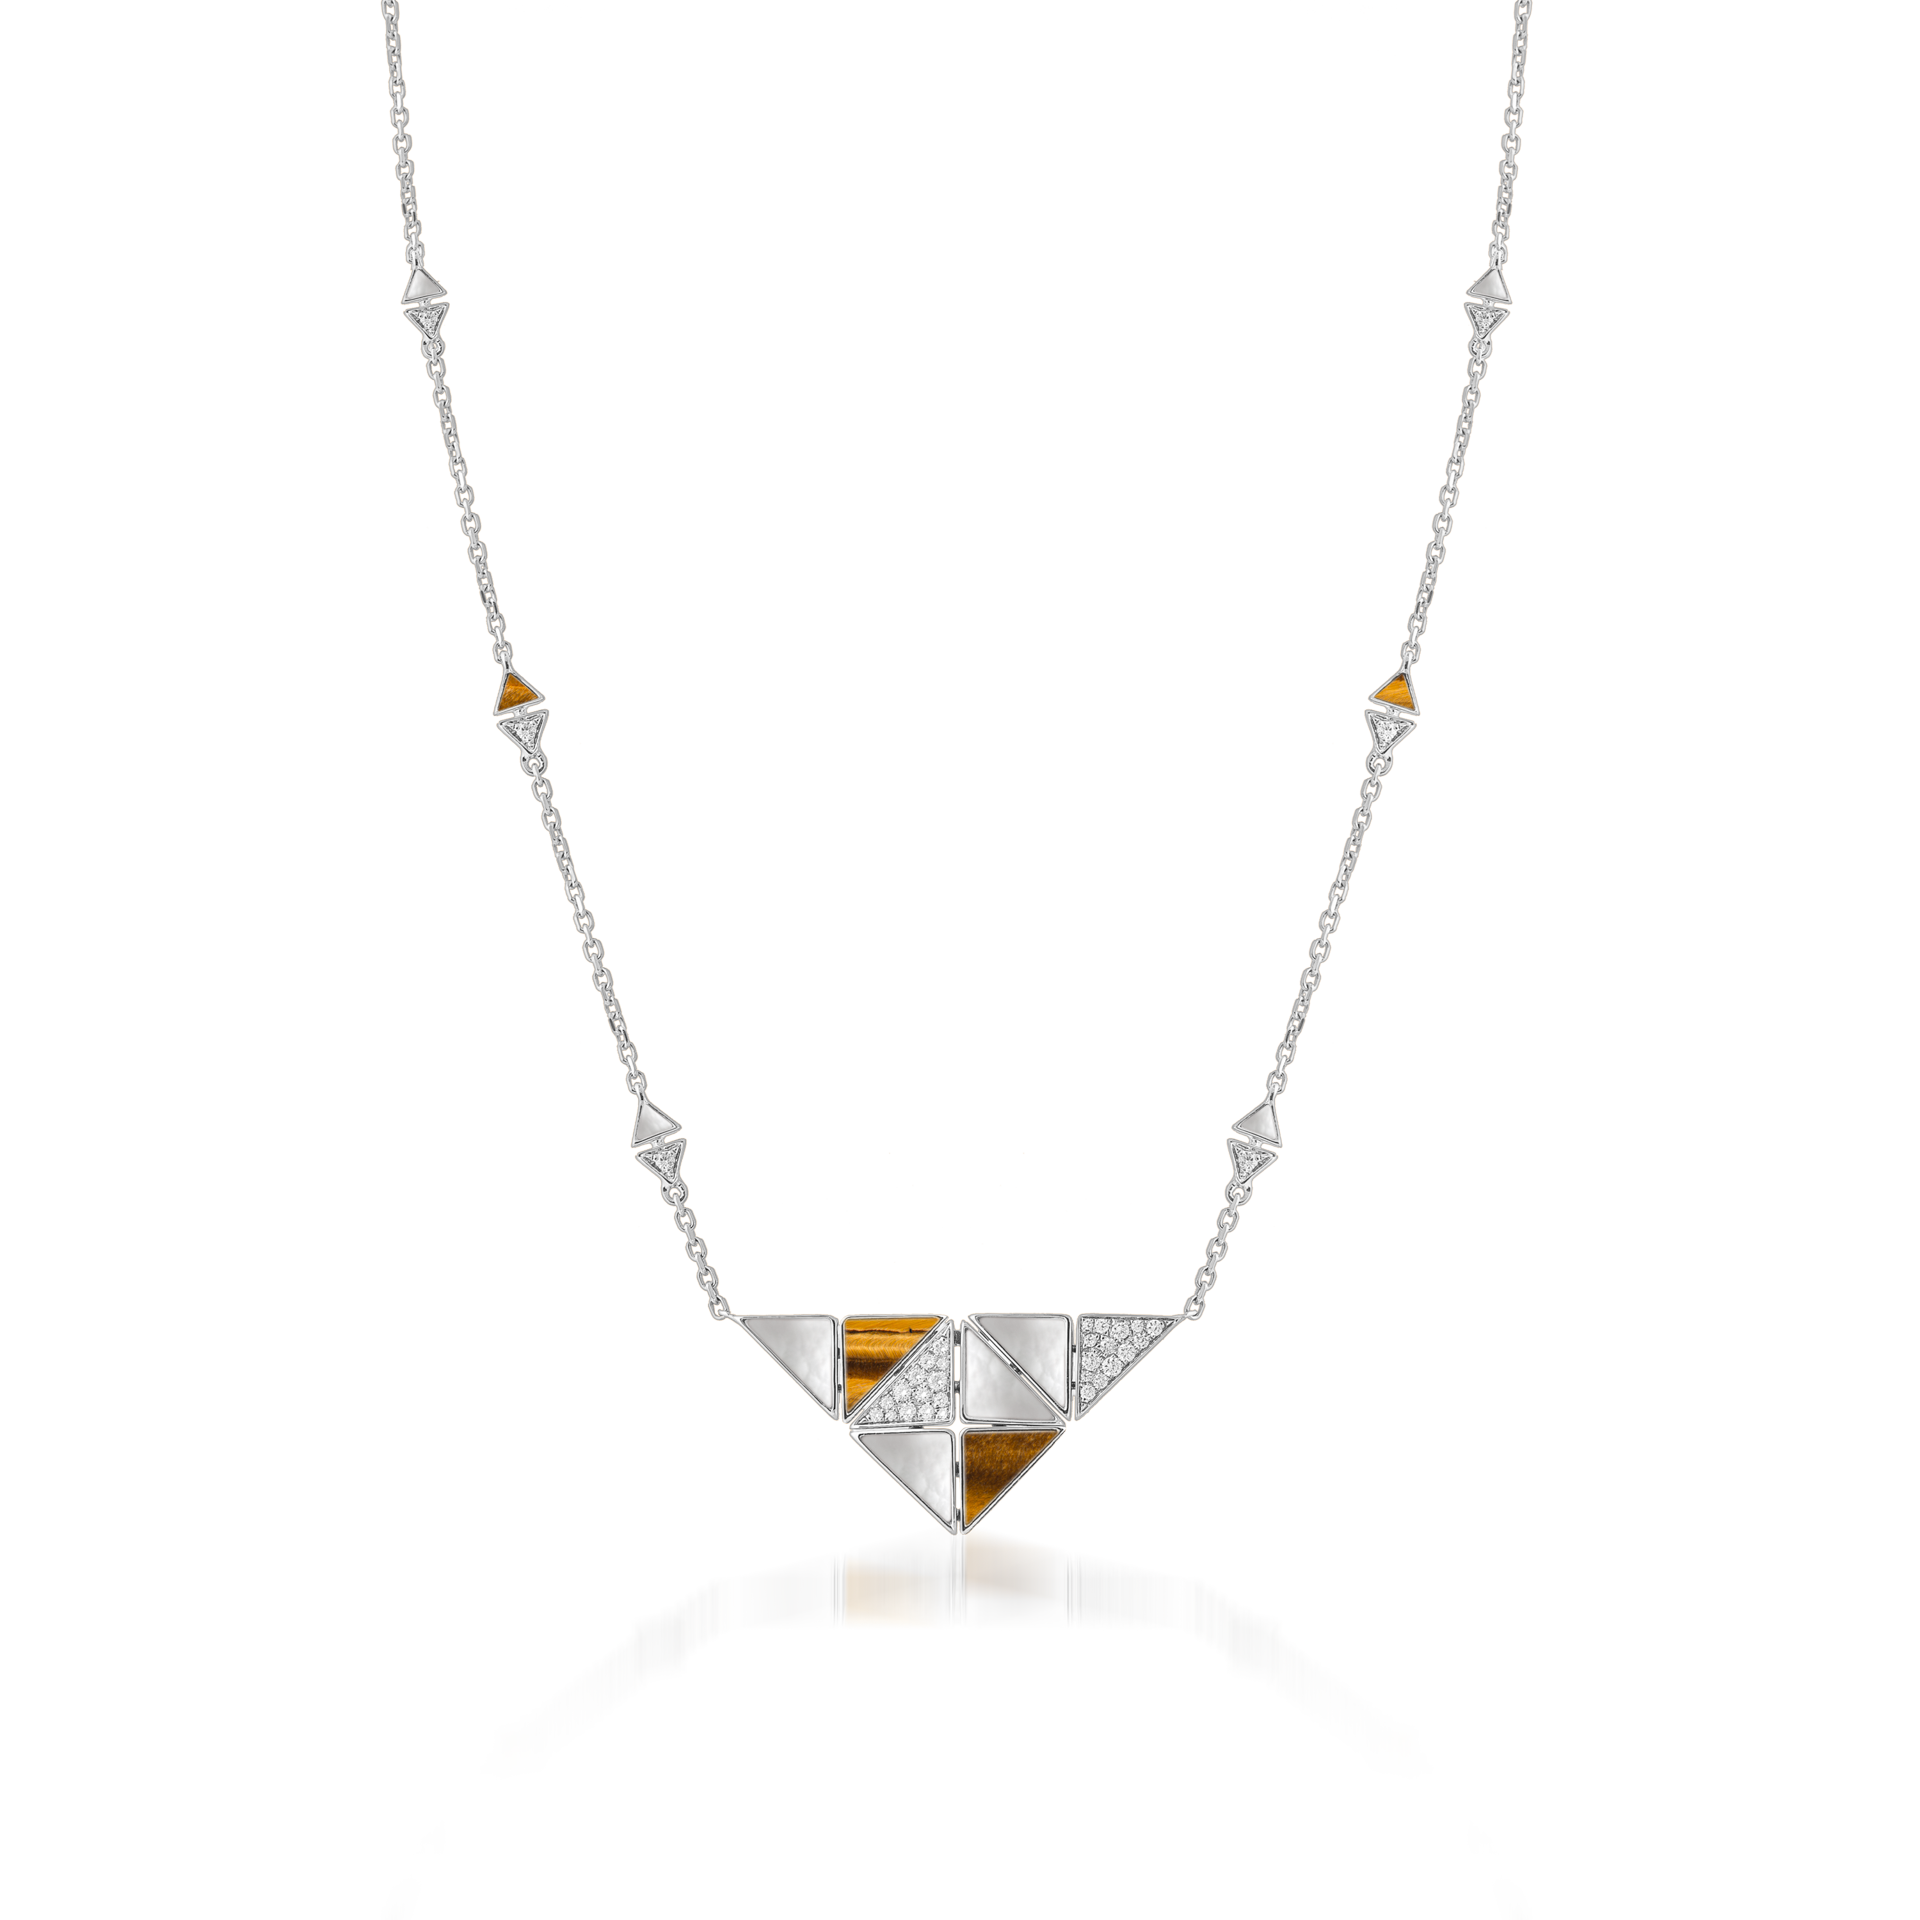 Deco Quadratic Necklace with Tiger Eye, White Mother of Pearl and Diamonds  In 18K White Gold